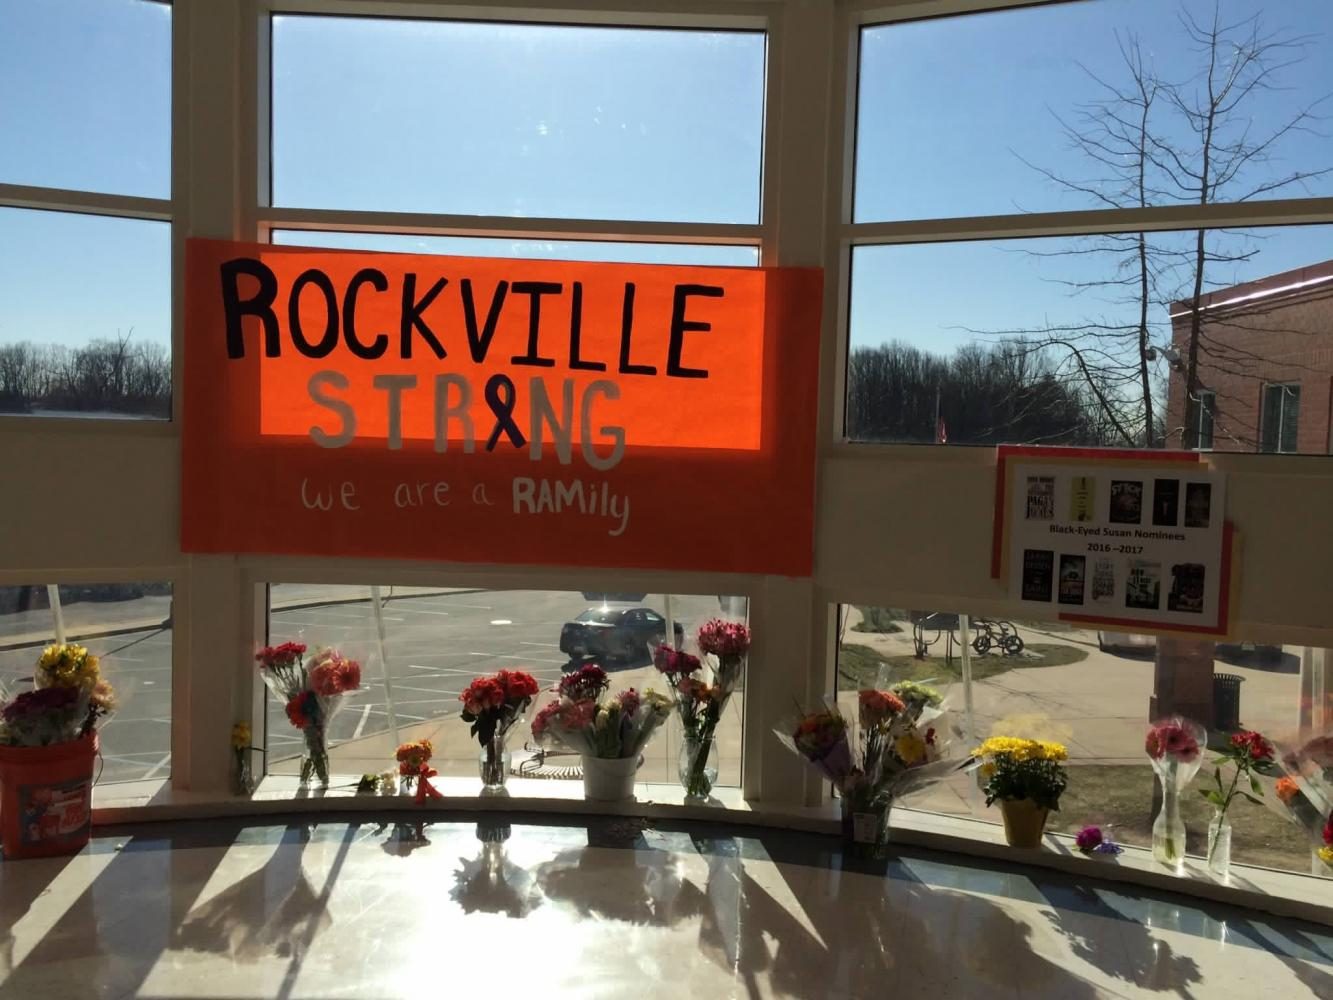 One of the many “Rockville Strong” posters is presented in the Rotunda. Students placed flowers for the victim following the March 16 incident.